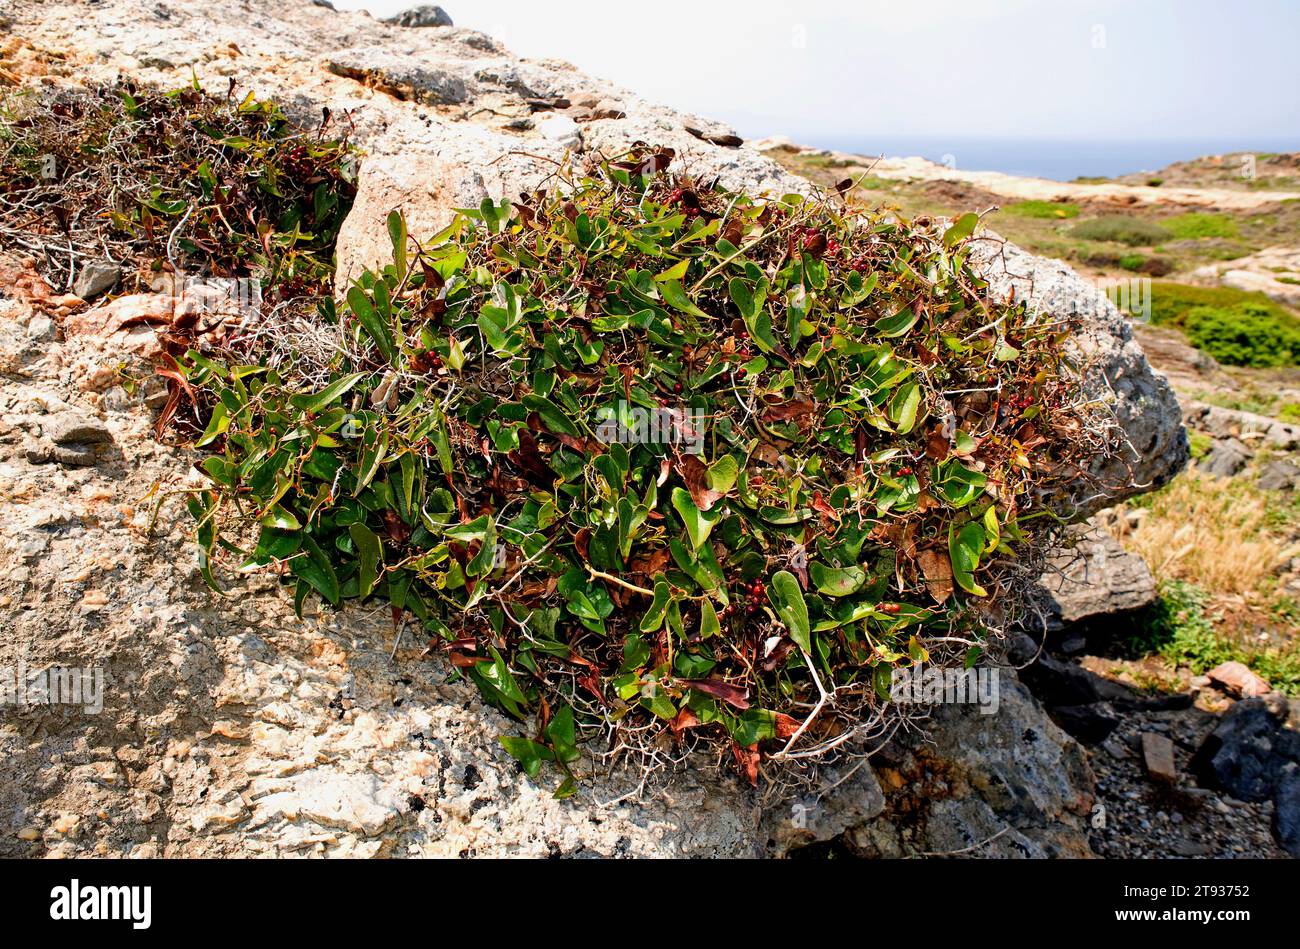 Sarsaparille (Smilax aspera) is a climber perennial plant native to Mediterranean region, central Africa and Asia. This photo was taken in Cabo Creus, Stock Photo